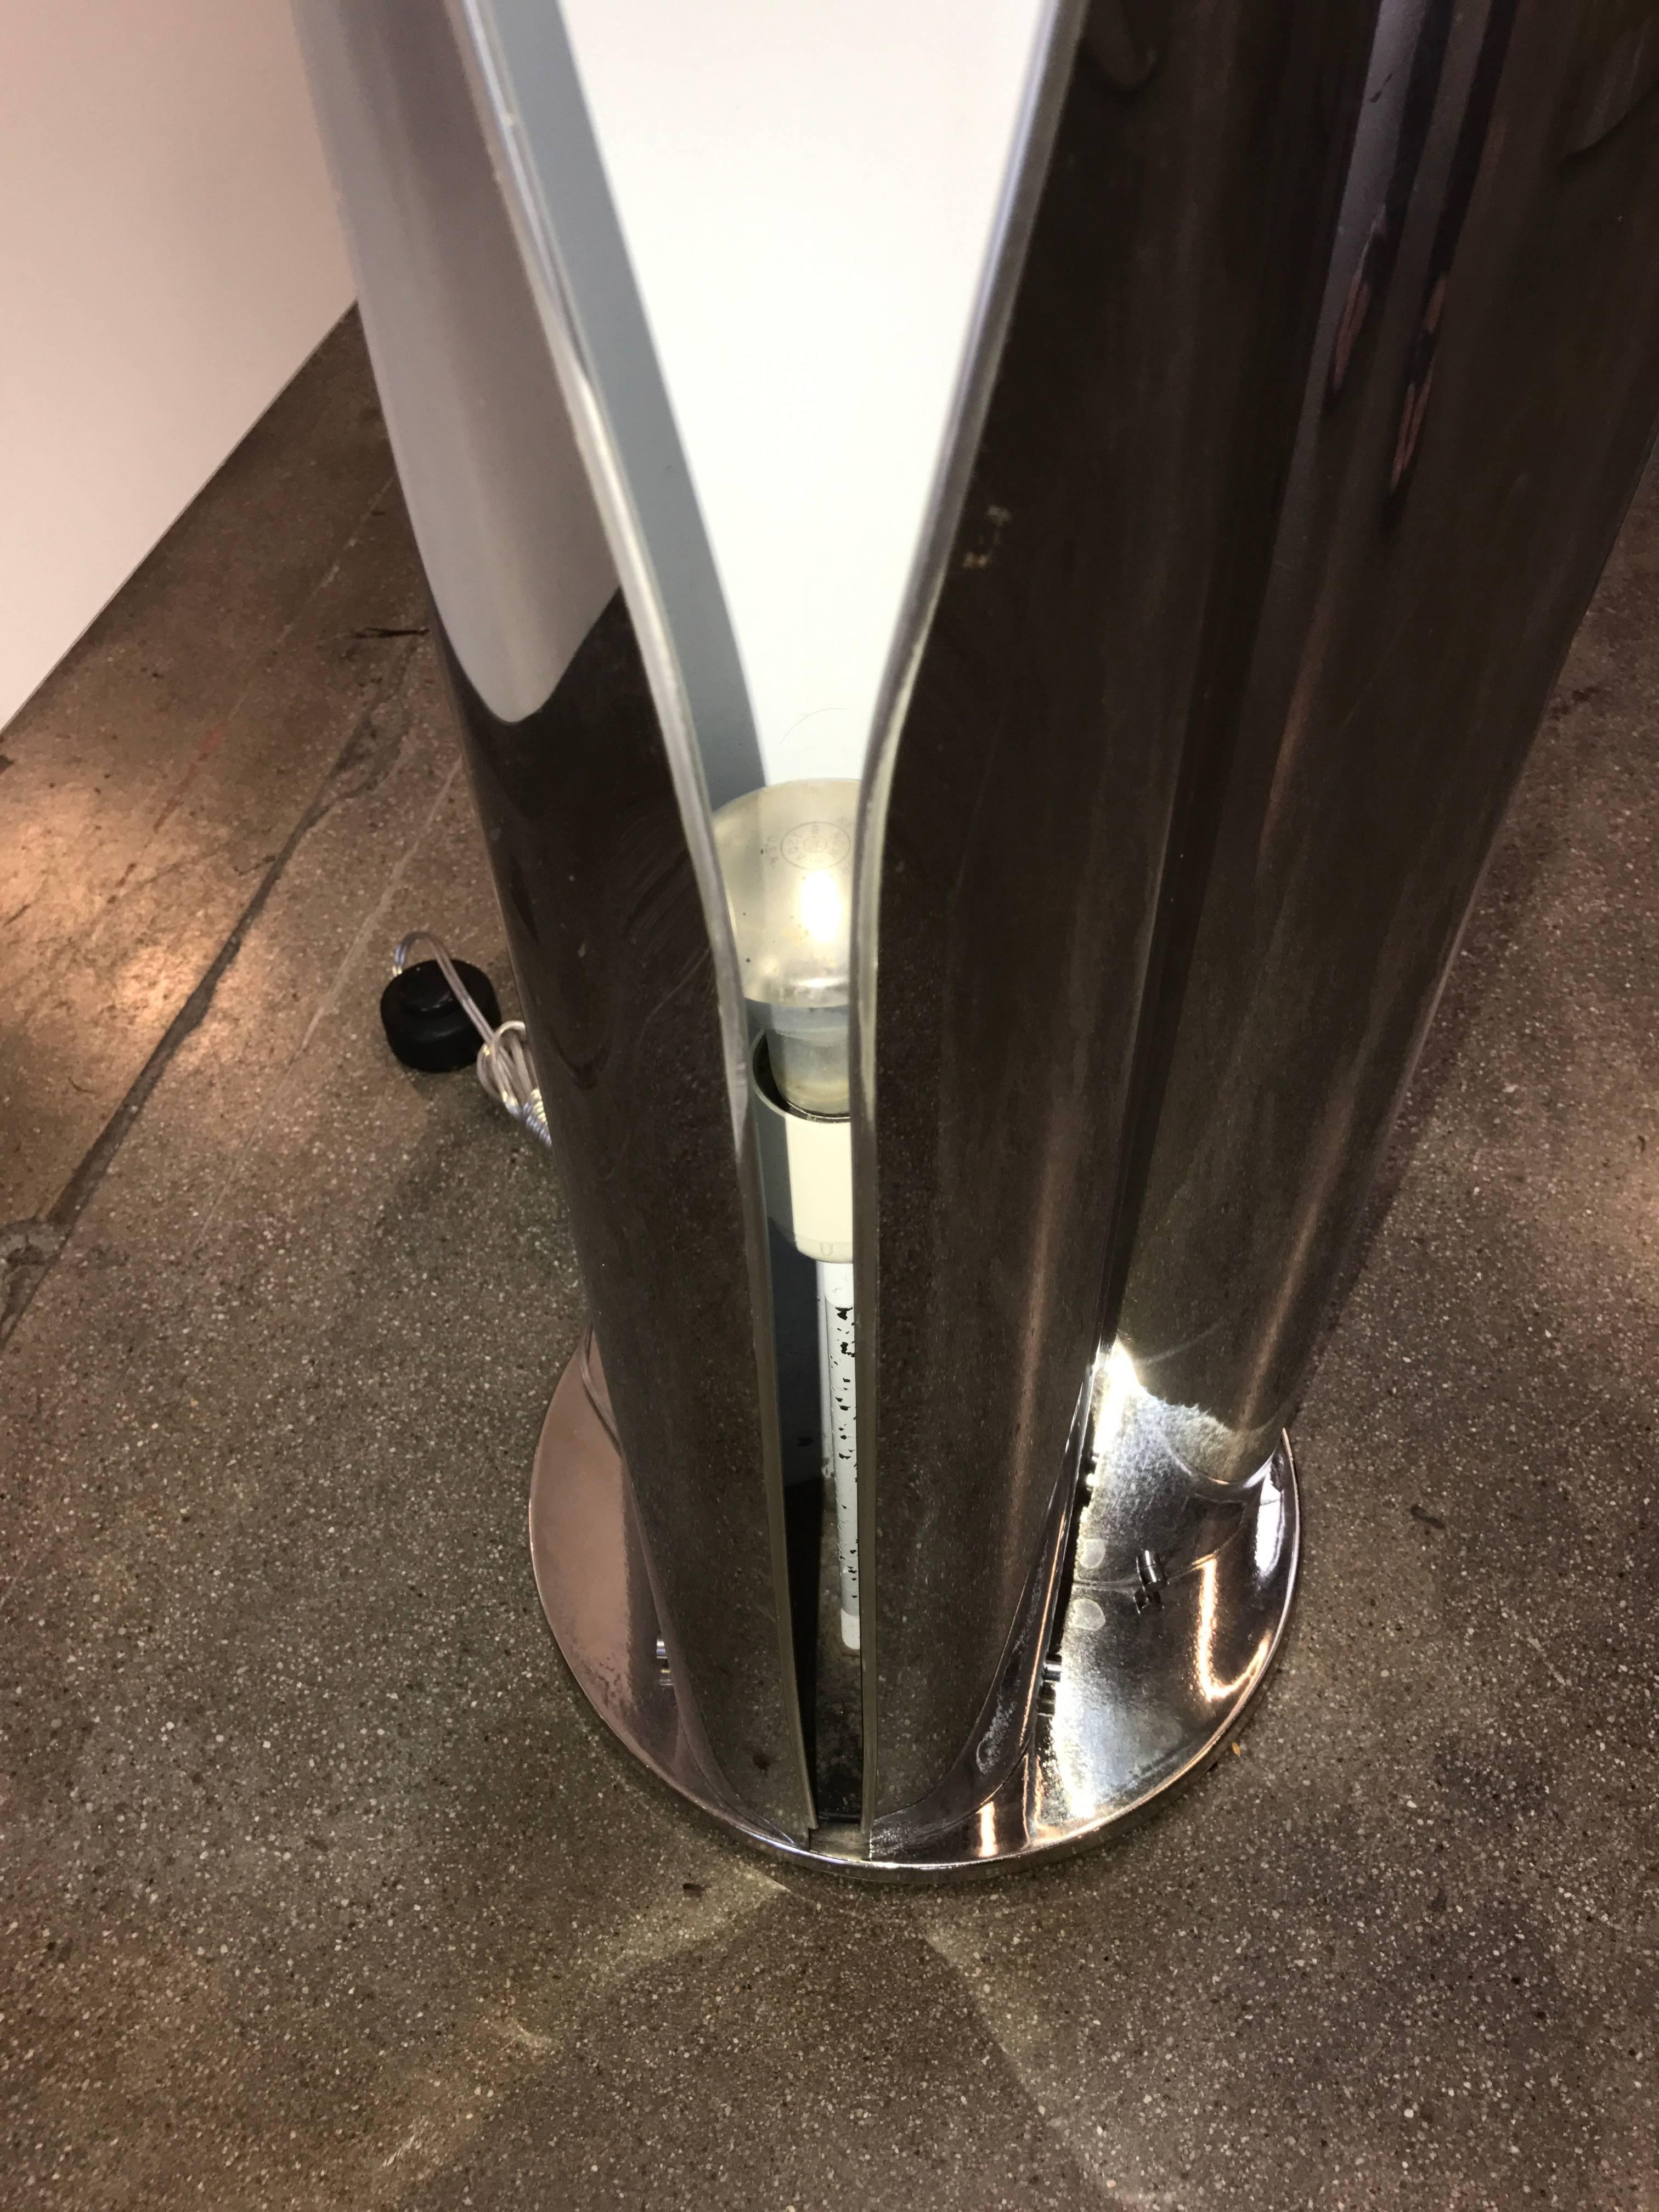 Spectacular Chrome Cylinder Tube Lamp Re-Wired and Re-Done 3